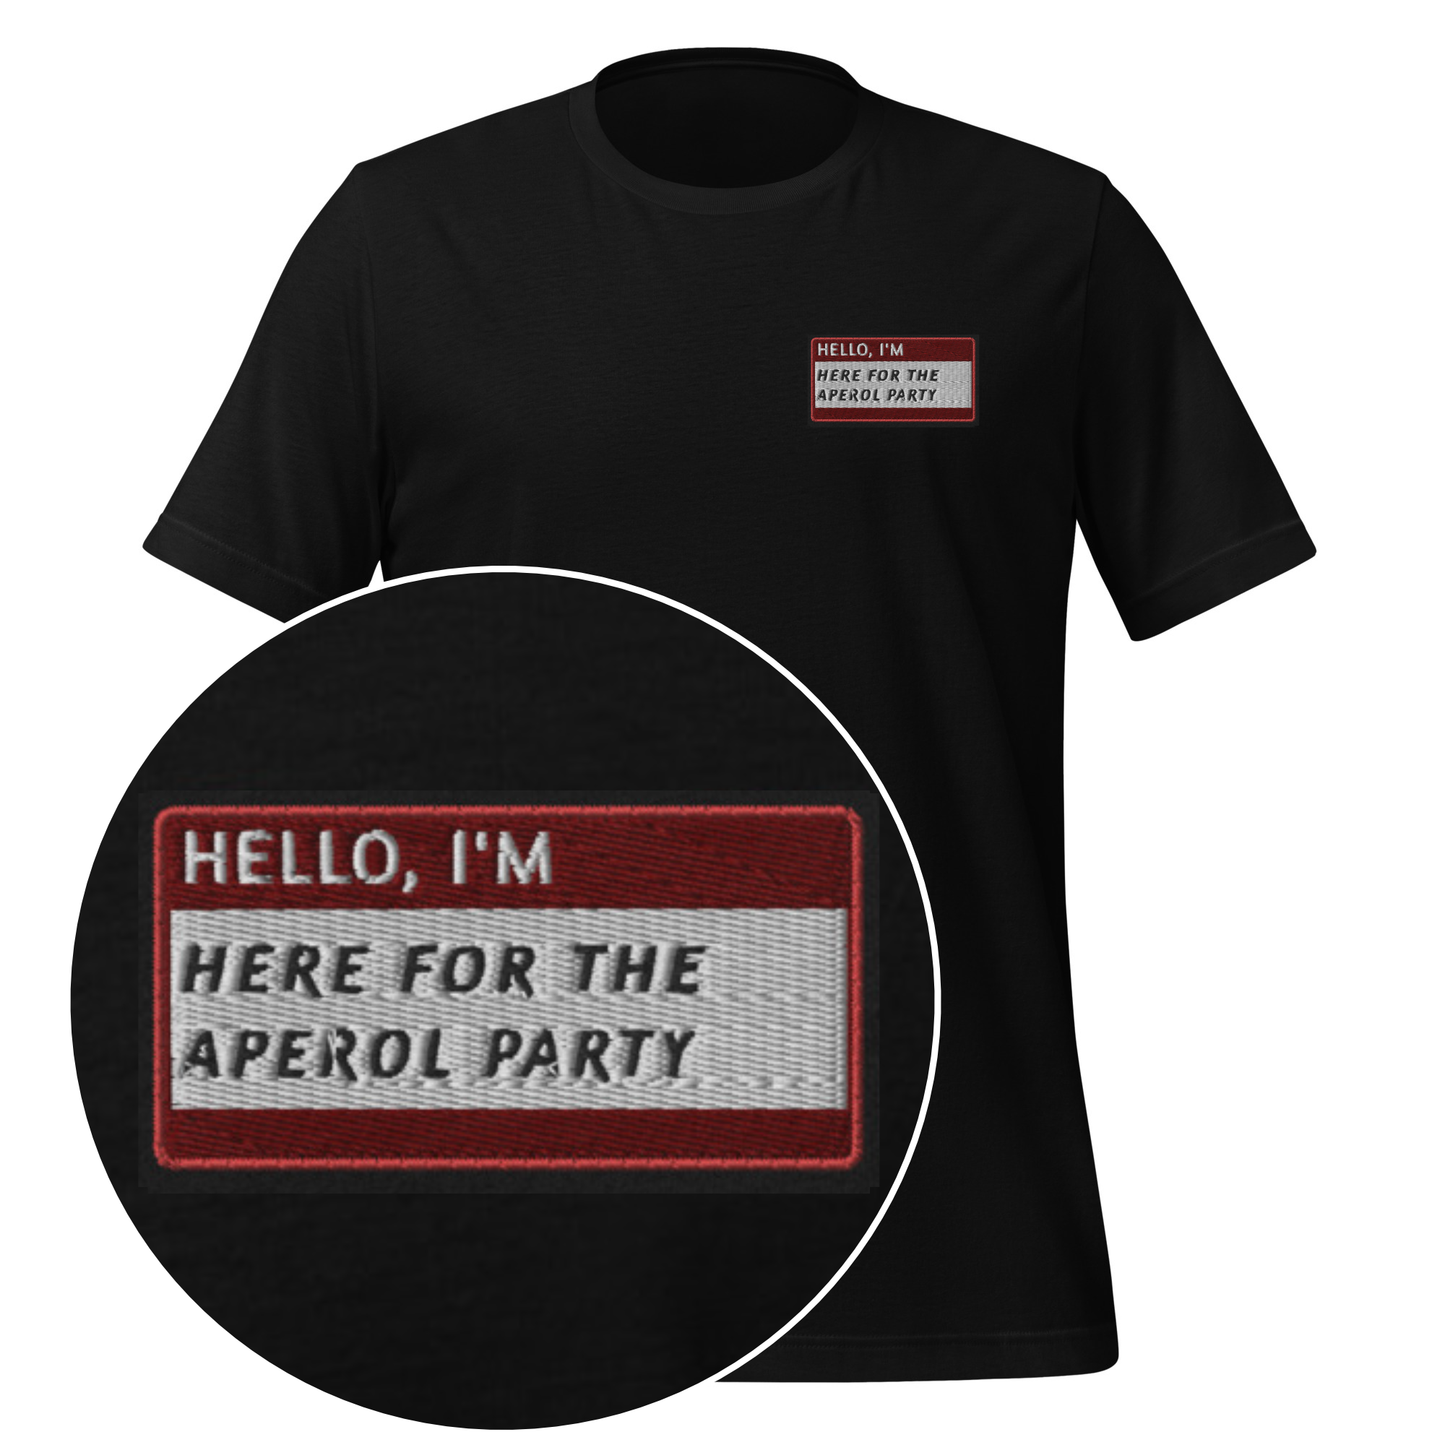 HELLO I'M HERE FOR THE APEROL PARTY - Name Tag T-Shirt